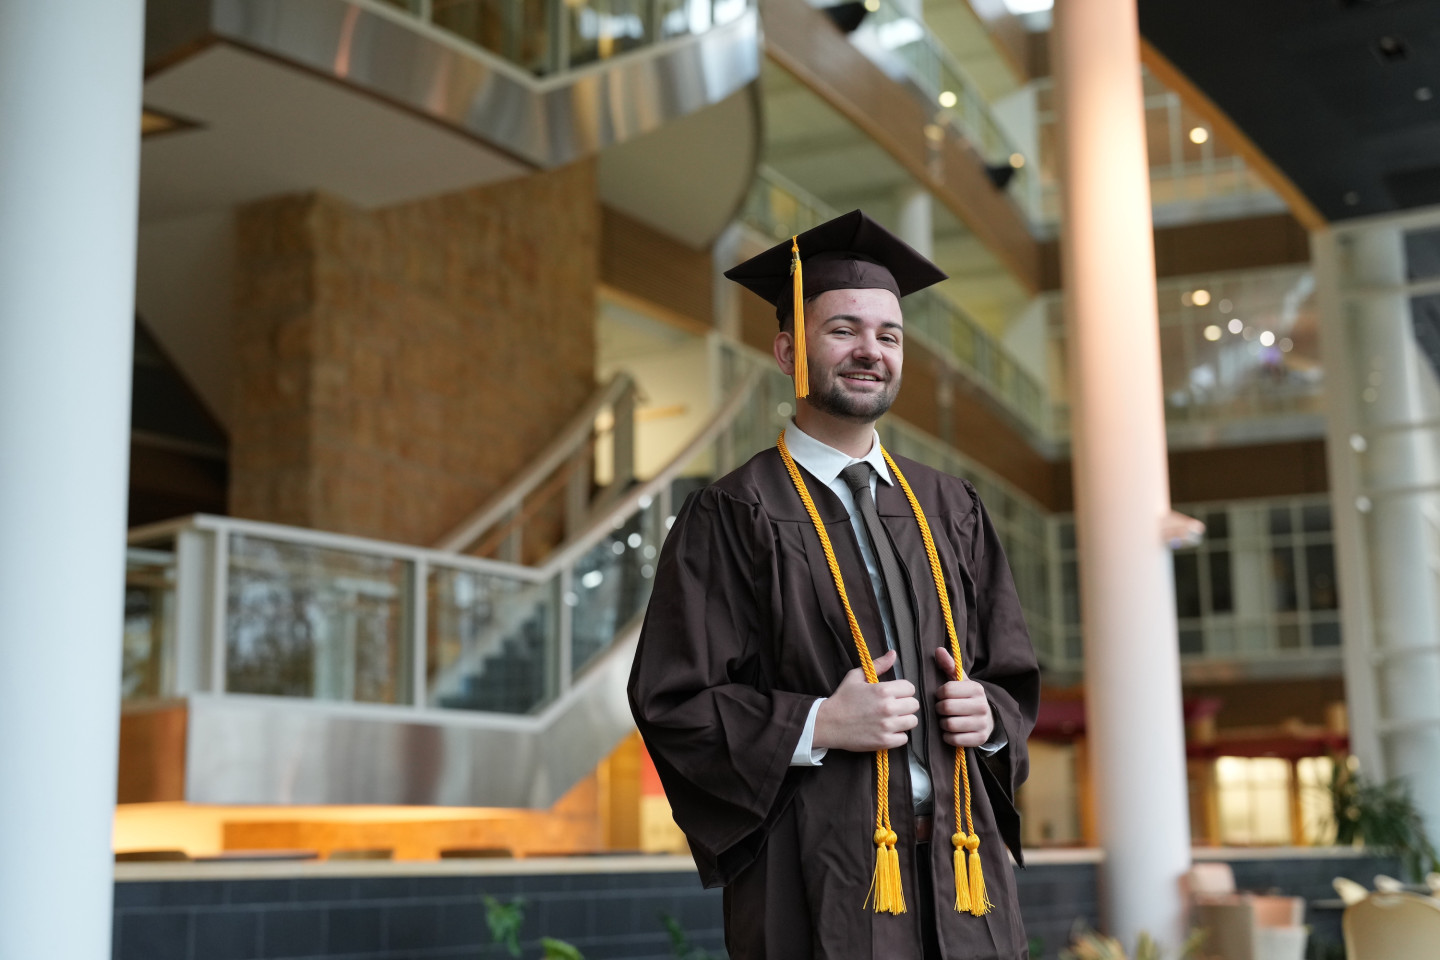 Cade Hine poses for a photo in his graduation cap and gown inside the atrium of the College of Health and Human Services building.